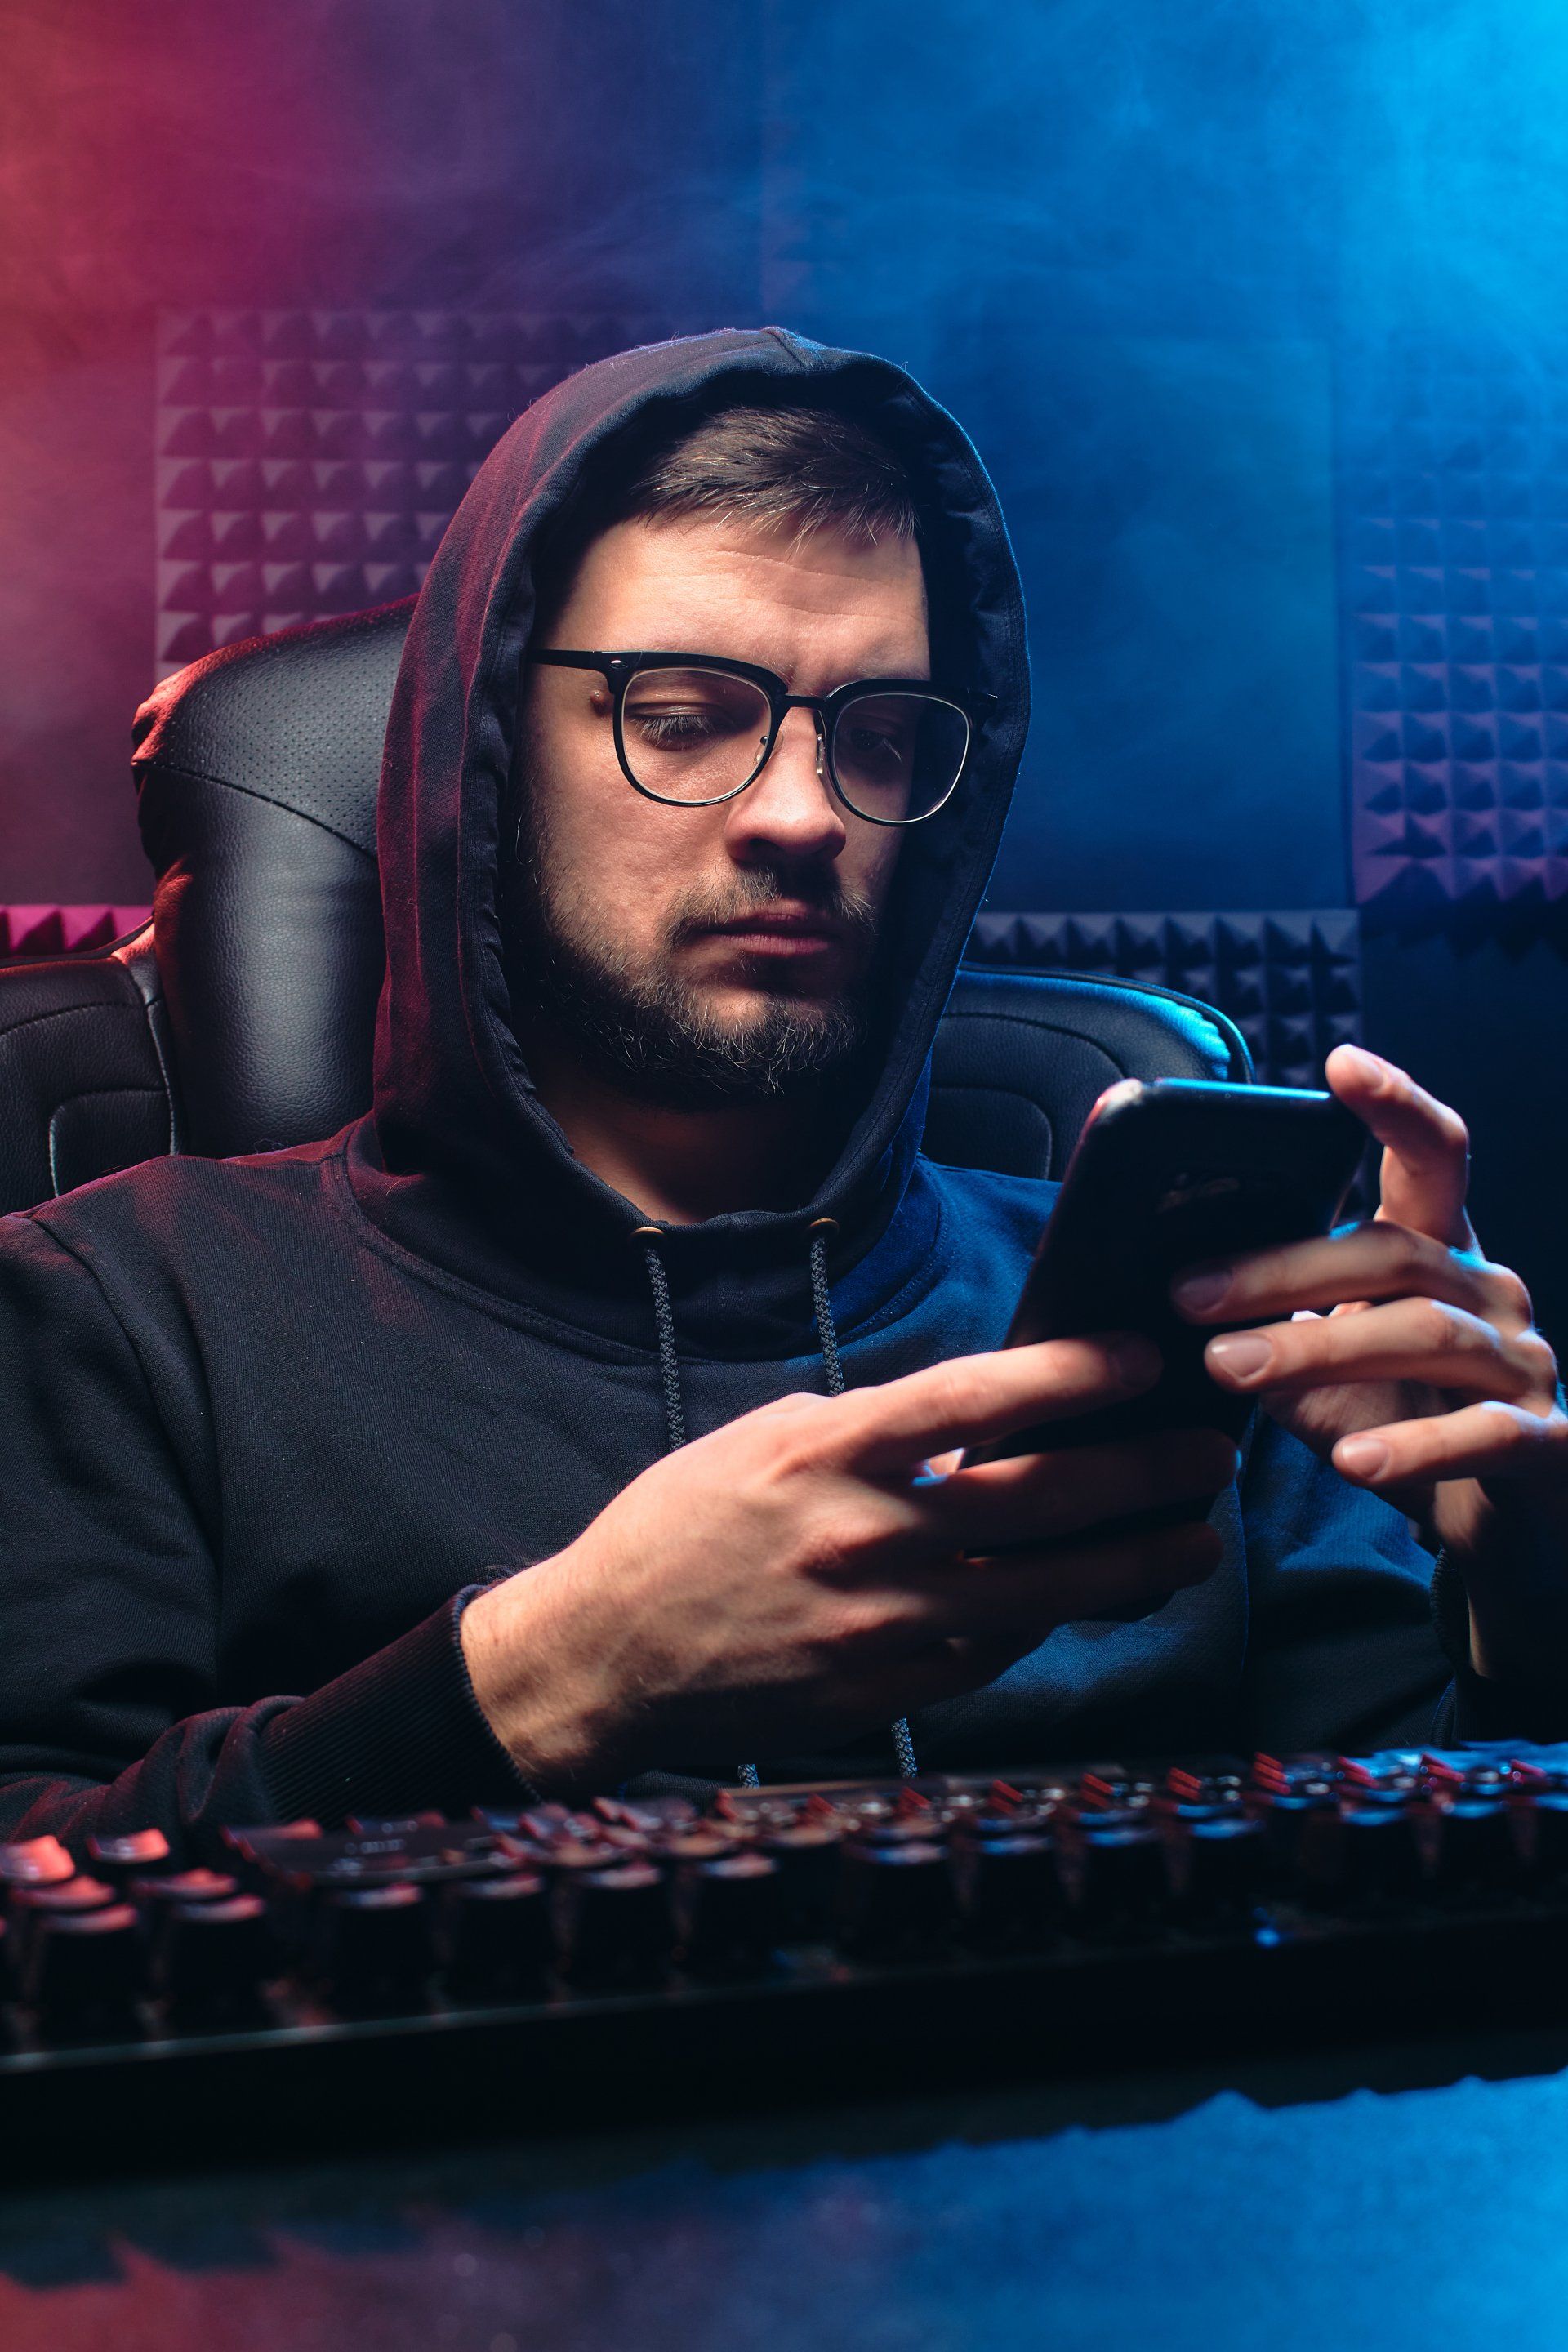 A man in a hoodie is sitting at a desk using a cell phone.